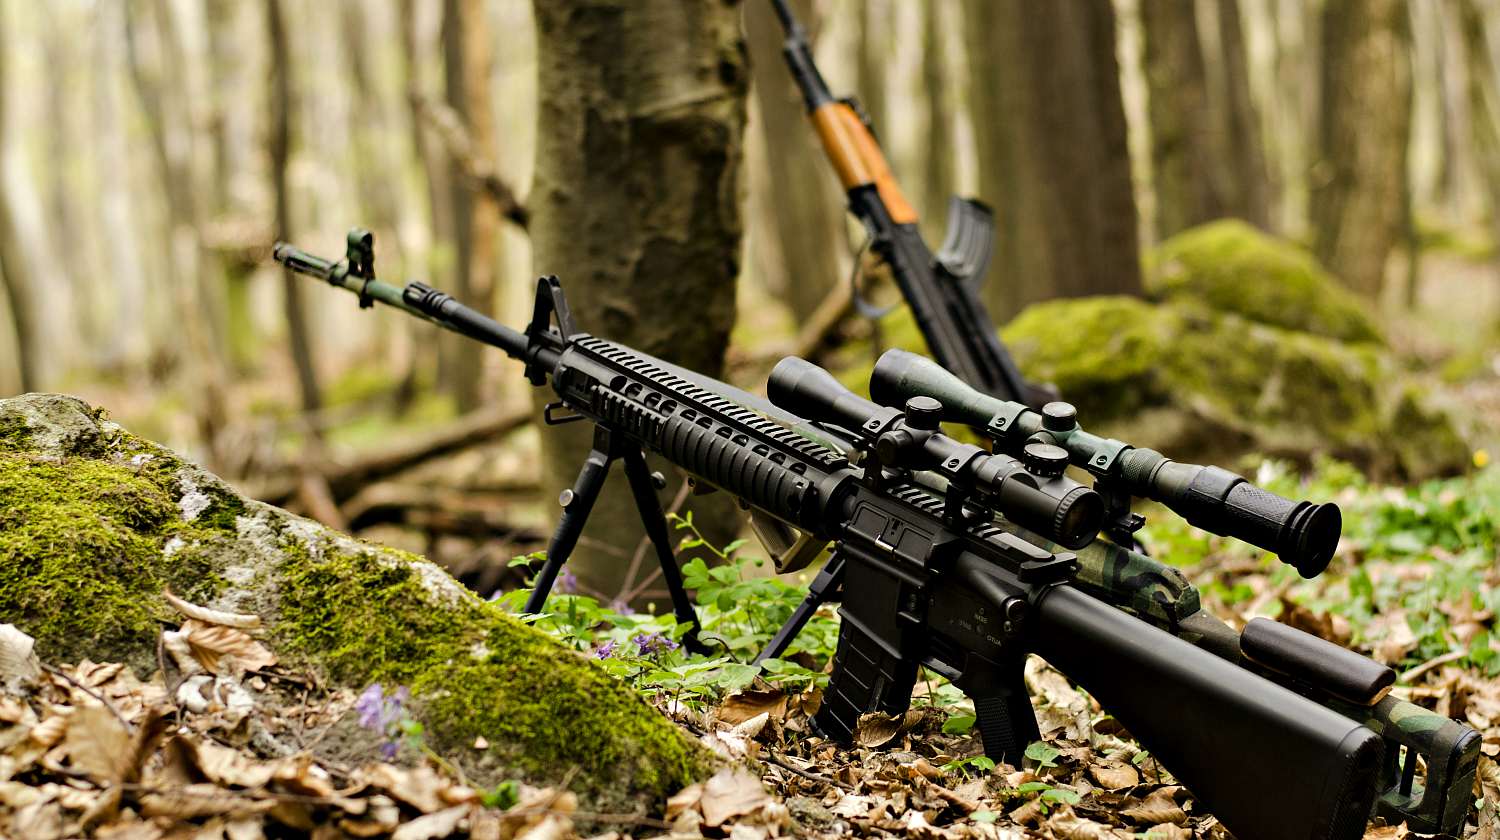 Featured | Sniper rifle on bipod on ground background | Sniper Rifle Facts | Things You Didn't Know About Sniper Rifles